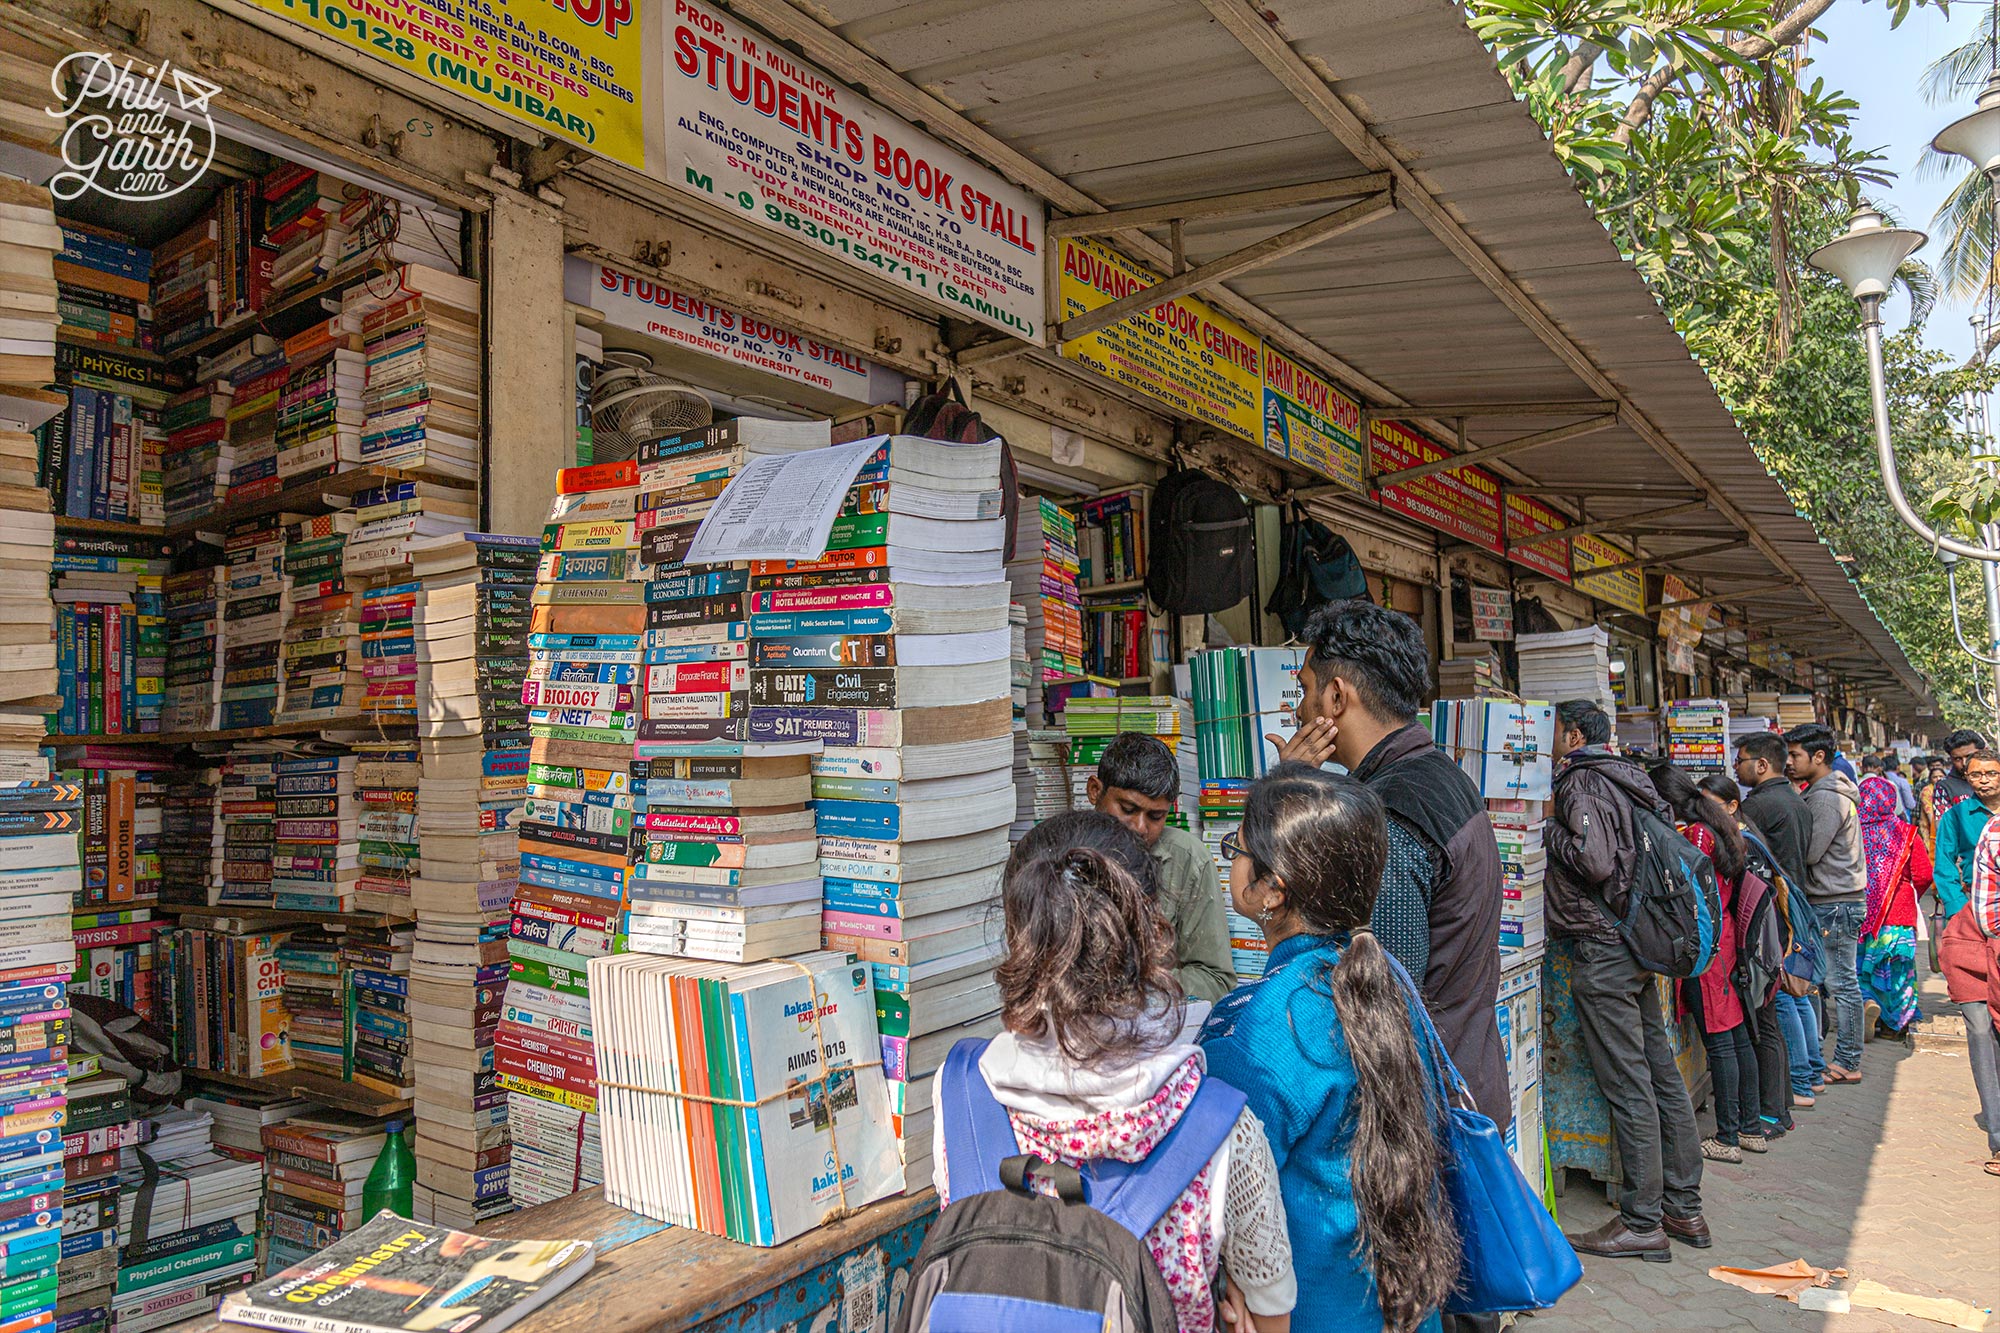 College Street is where students come to buy and sell second hand books